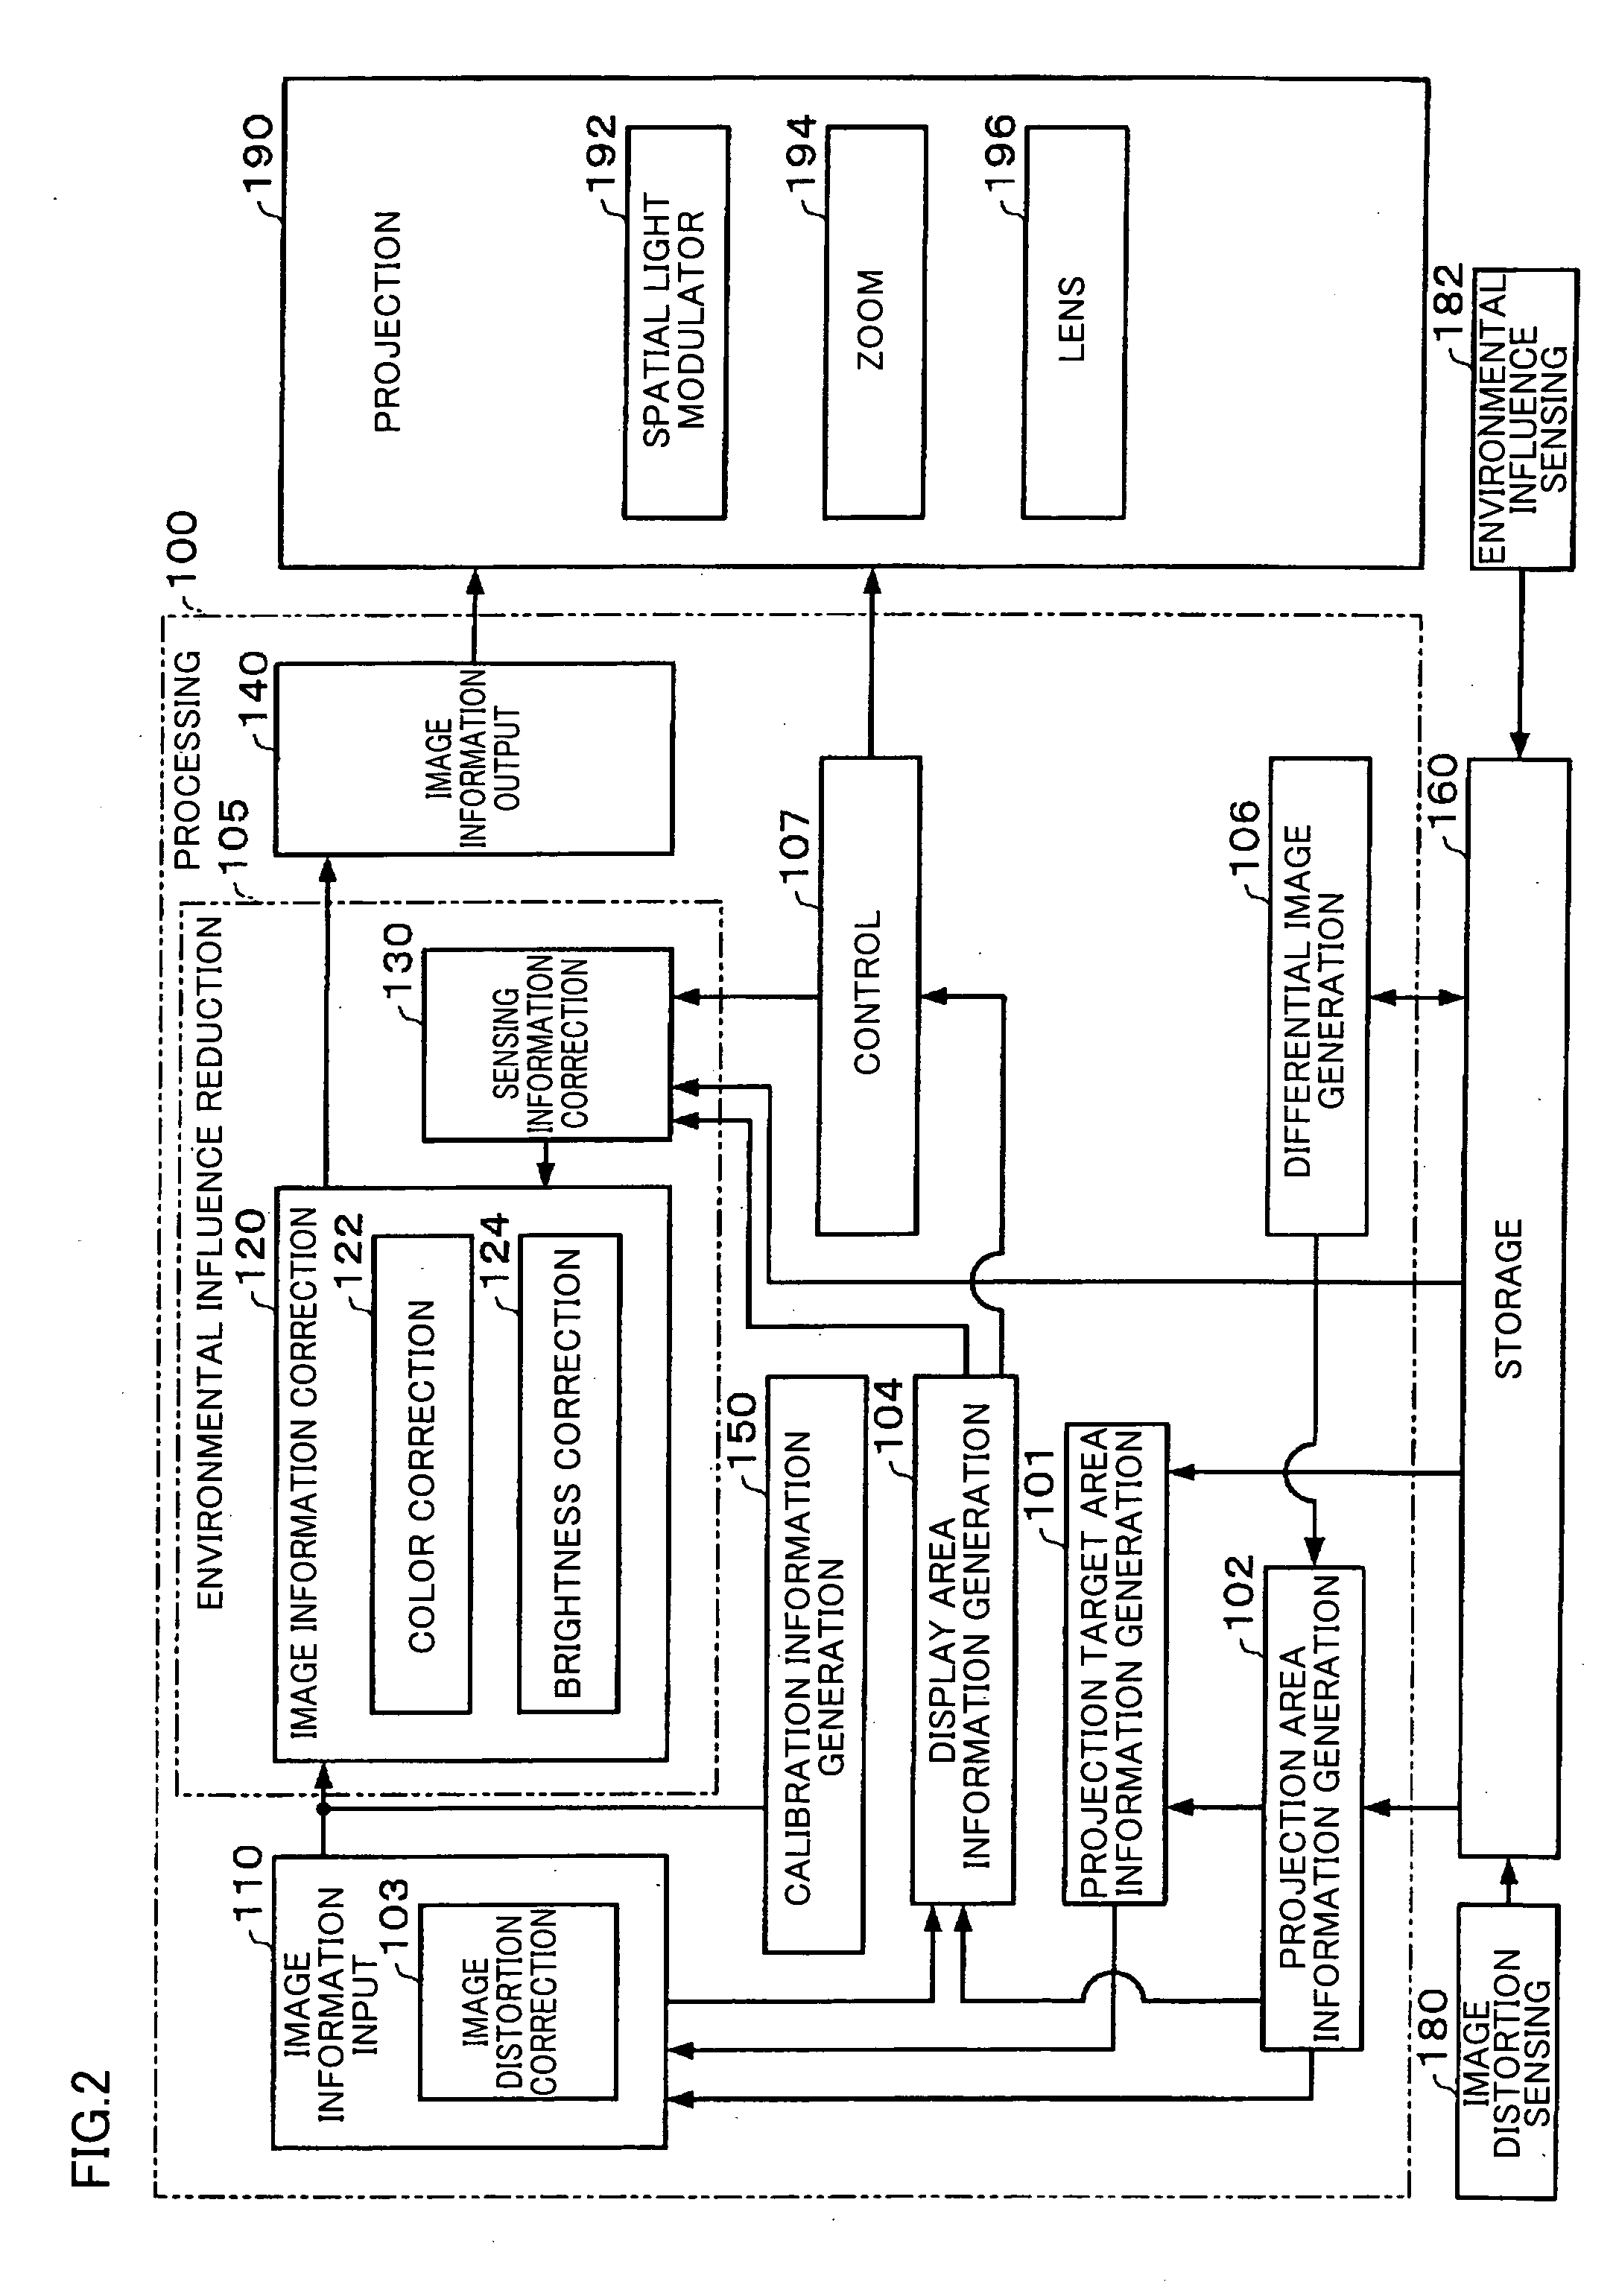 Image processing system, projector, and image processing method